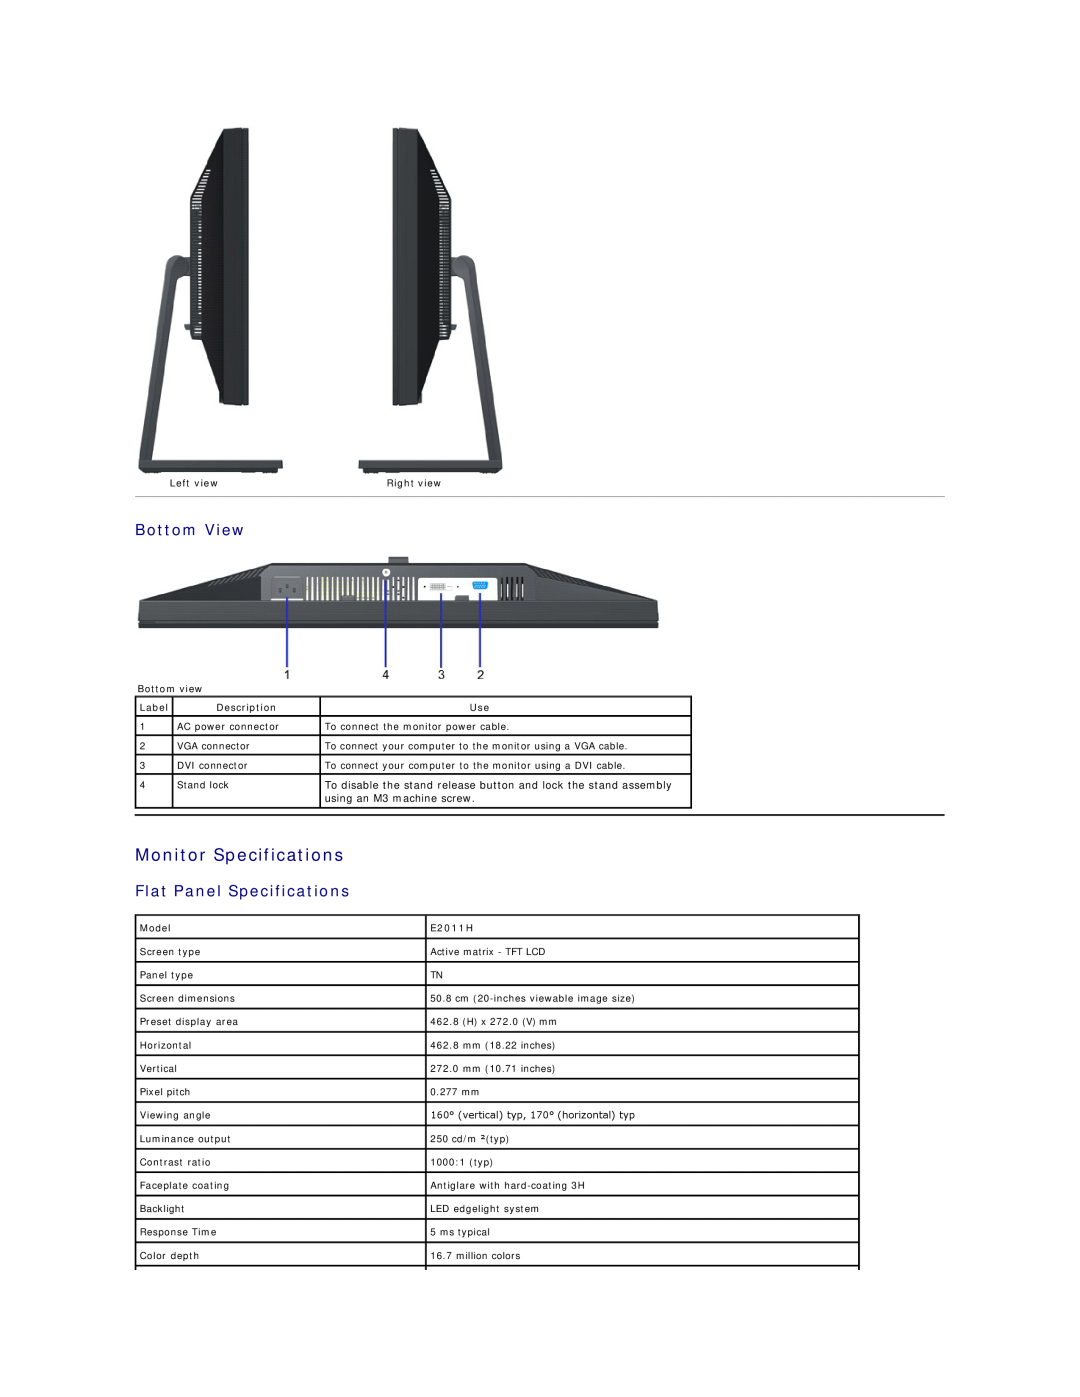 Dell E2011HC appendix Monitor Specifications, Bottom View, Flat Panel Specifications, using an M3 machine screw 